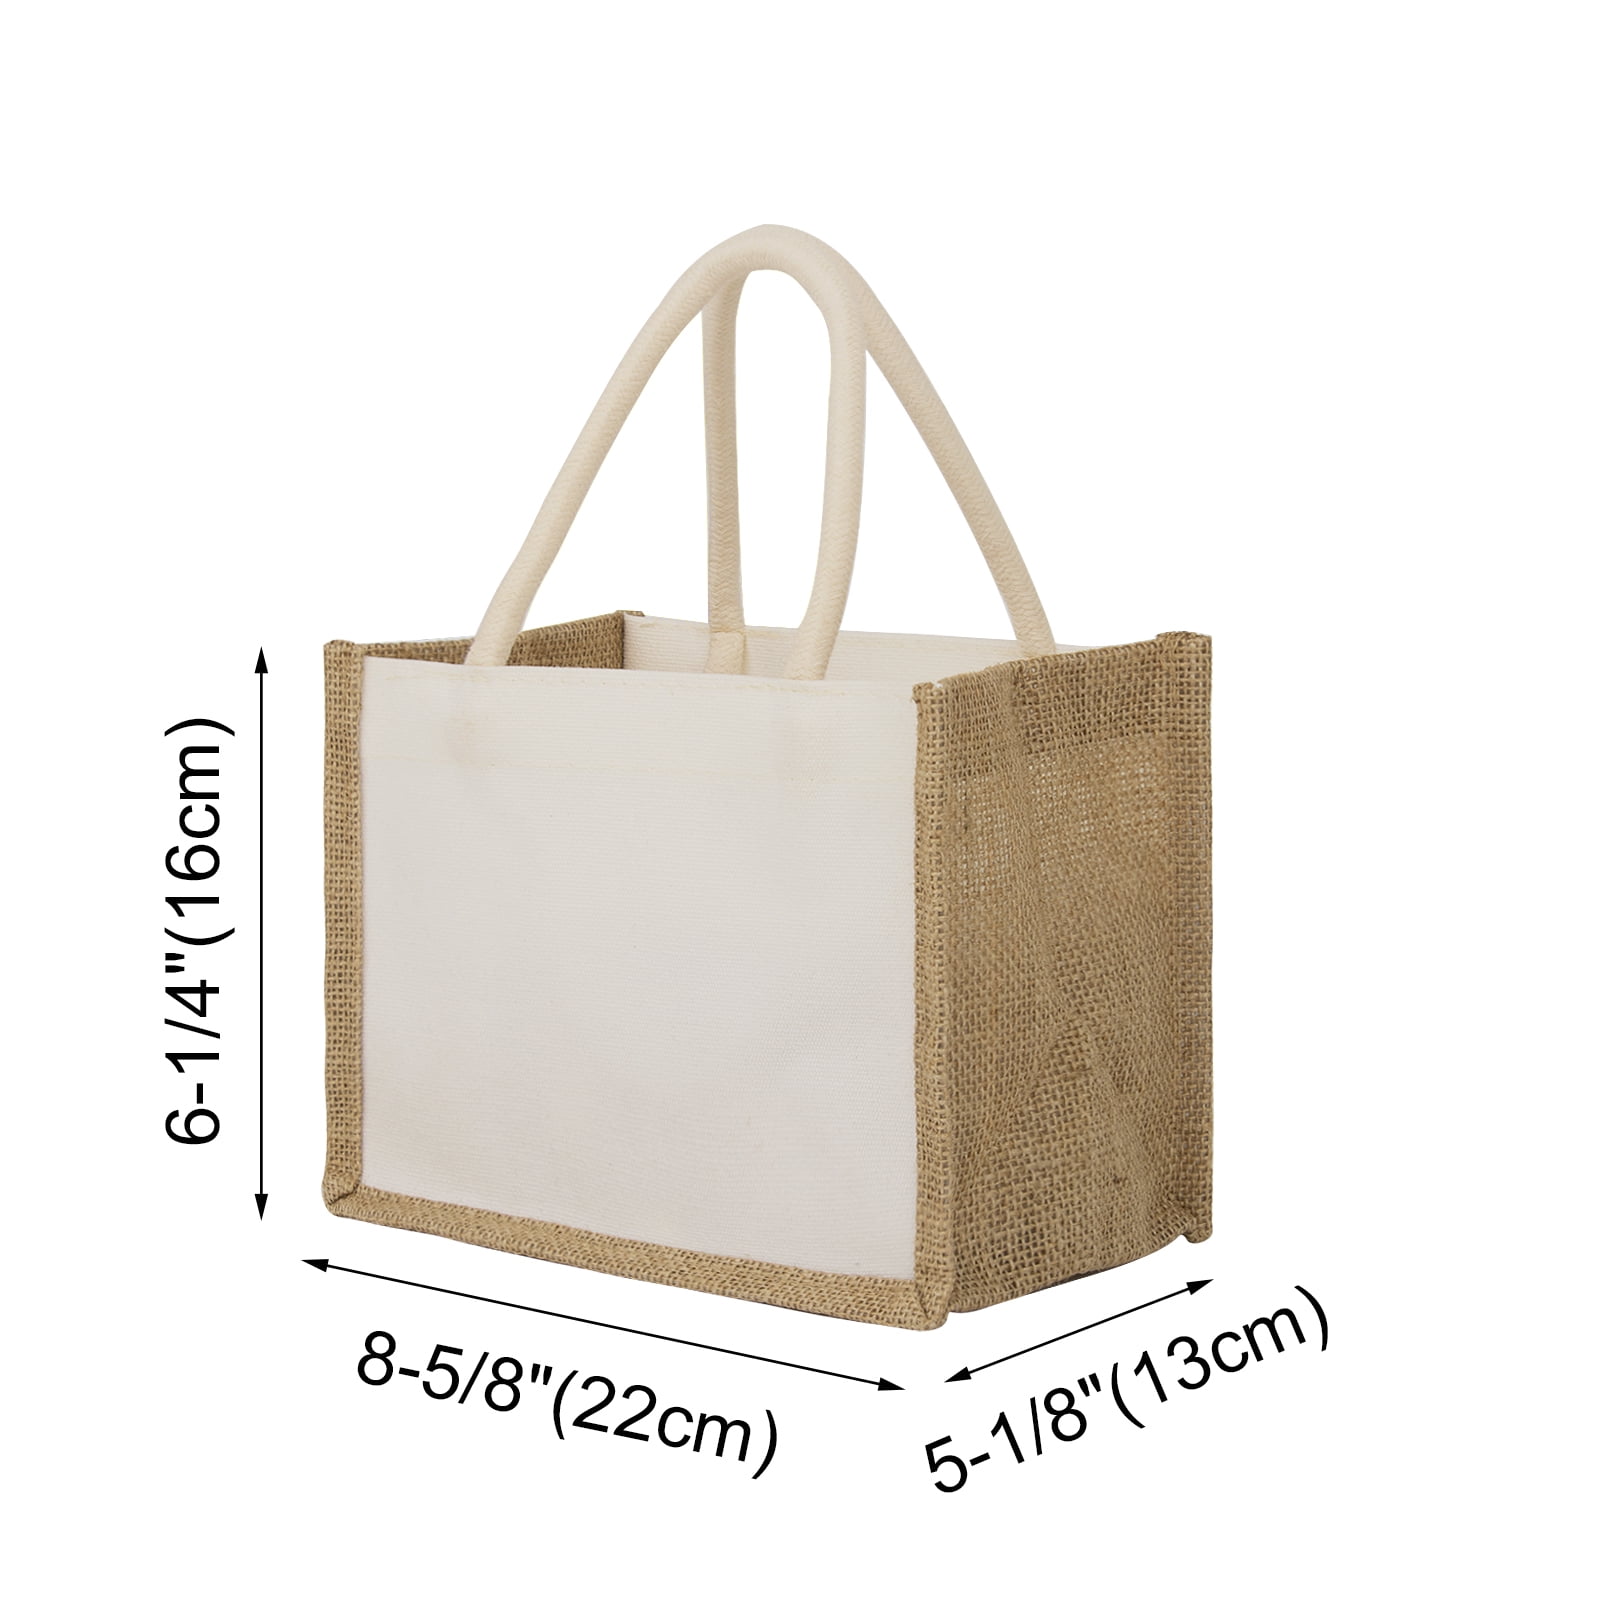  Sweetude 6 Pieces Extra Large Canvas Tote Bag Utility